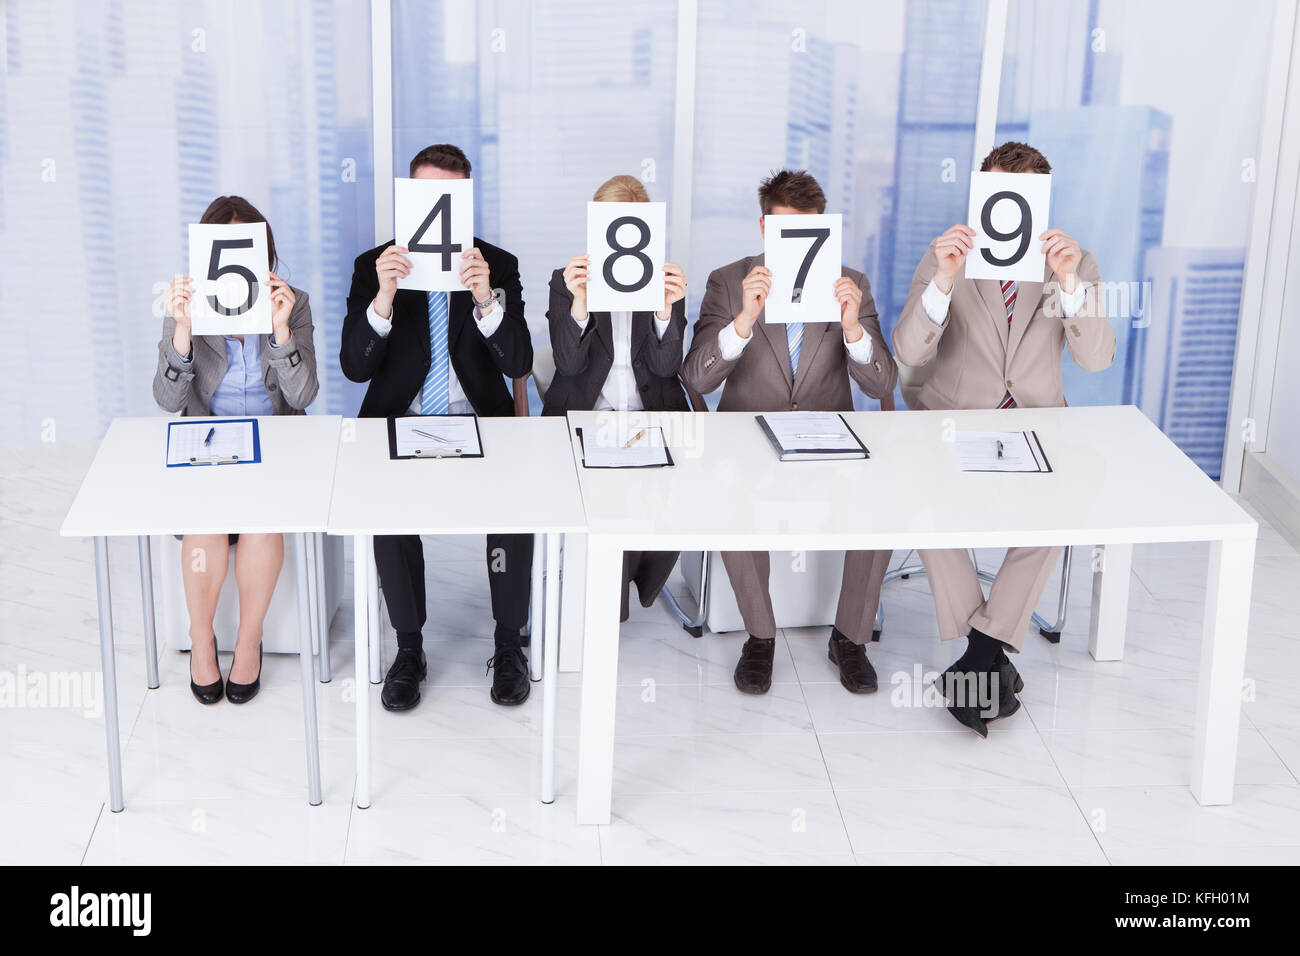 Portrait of confident business people showing score cards Stock Photo